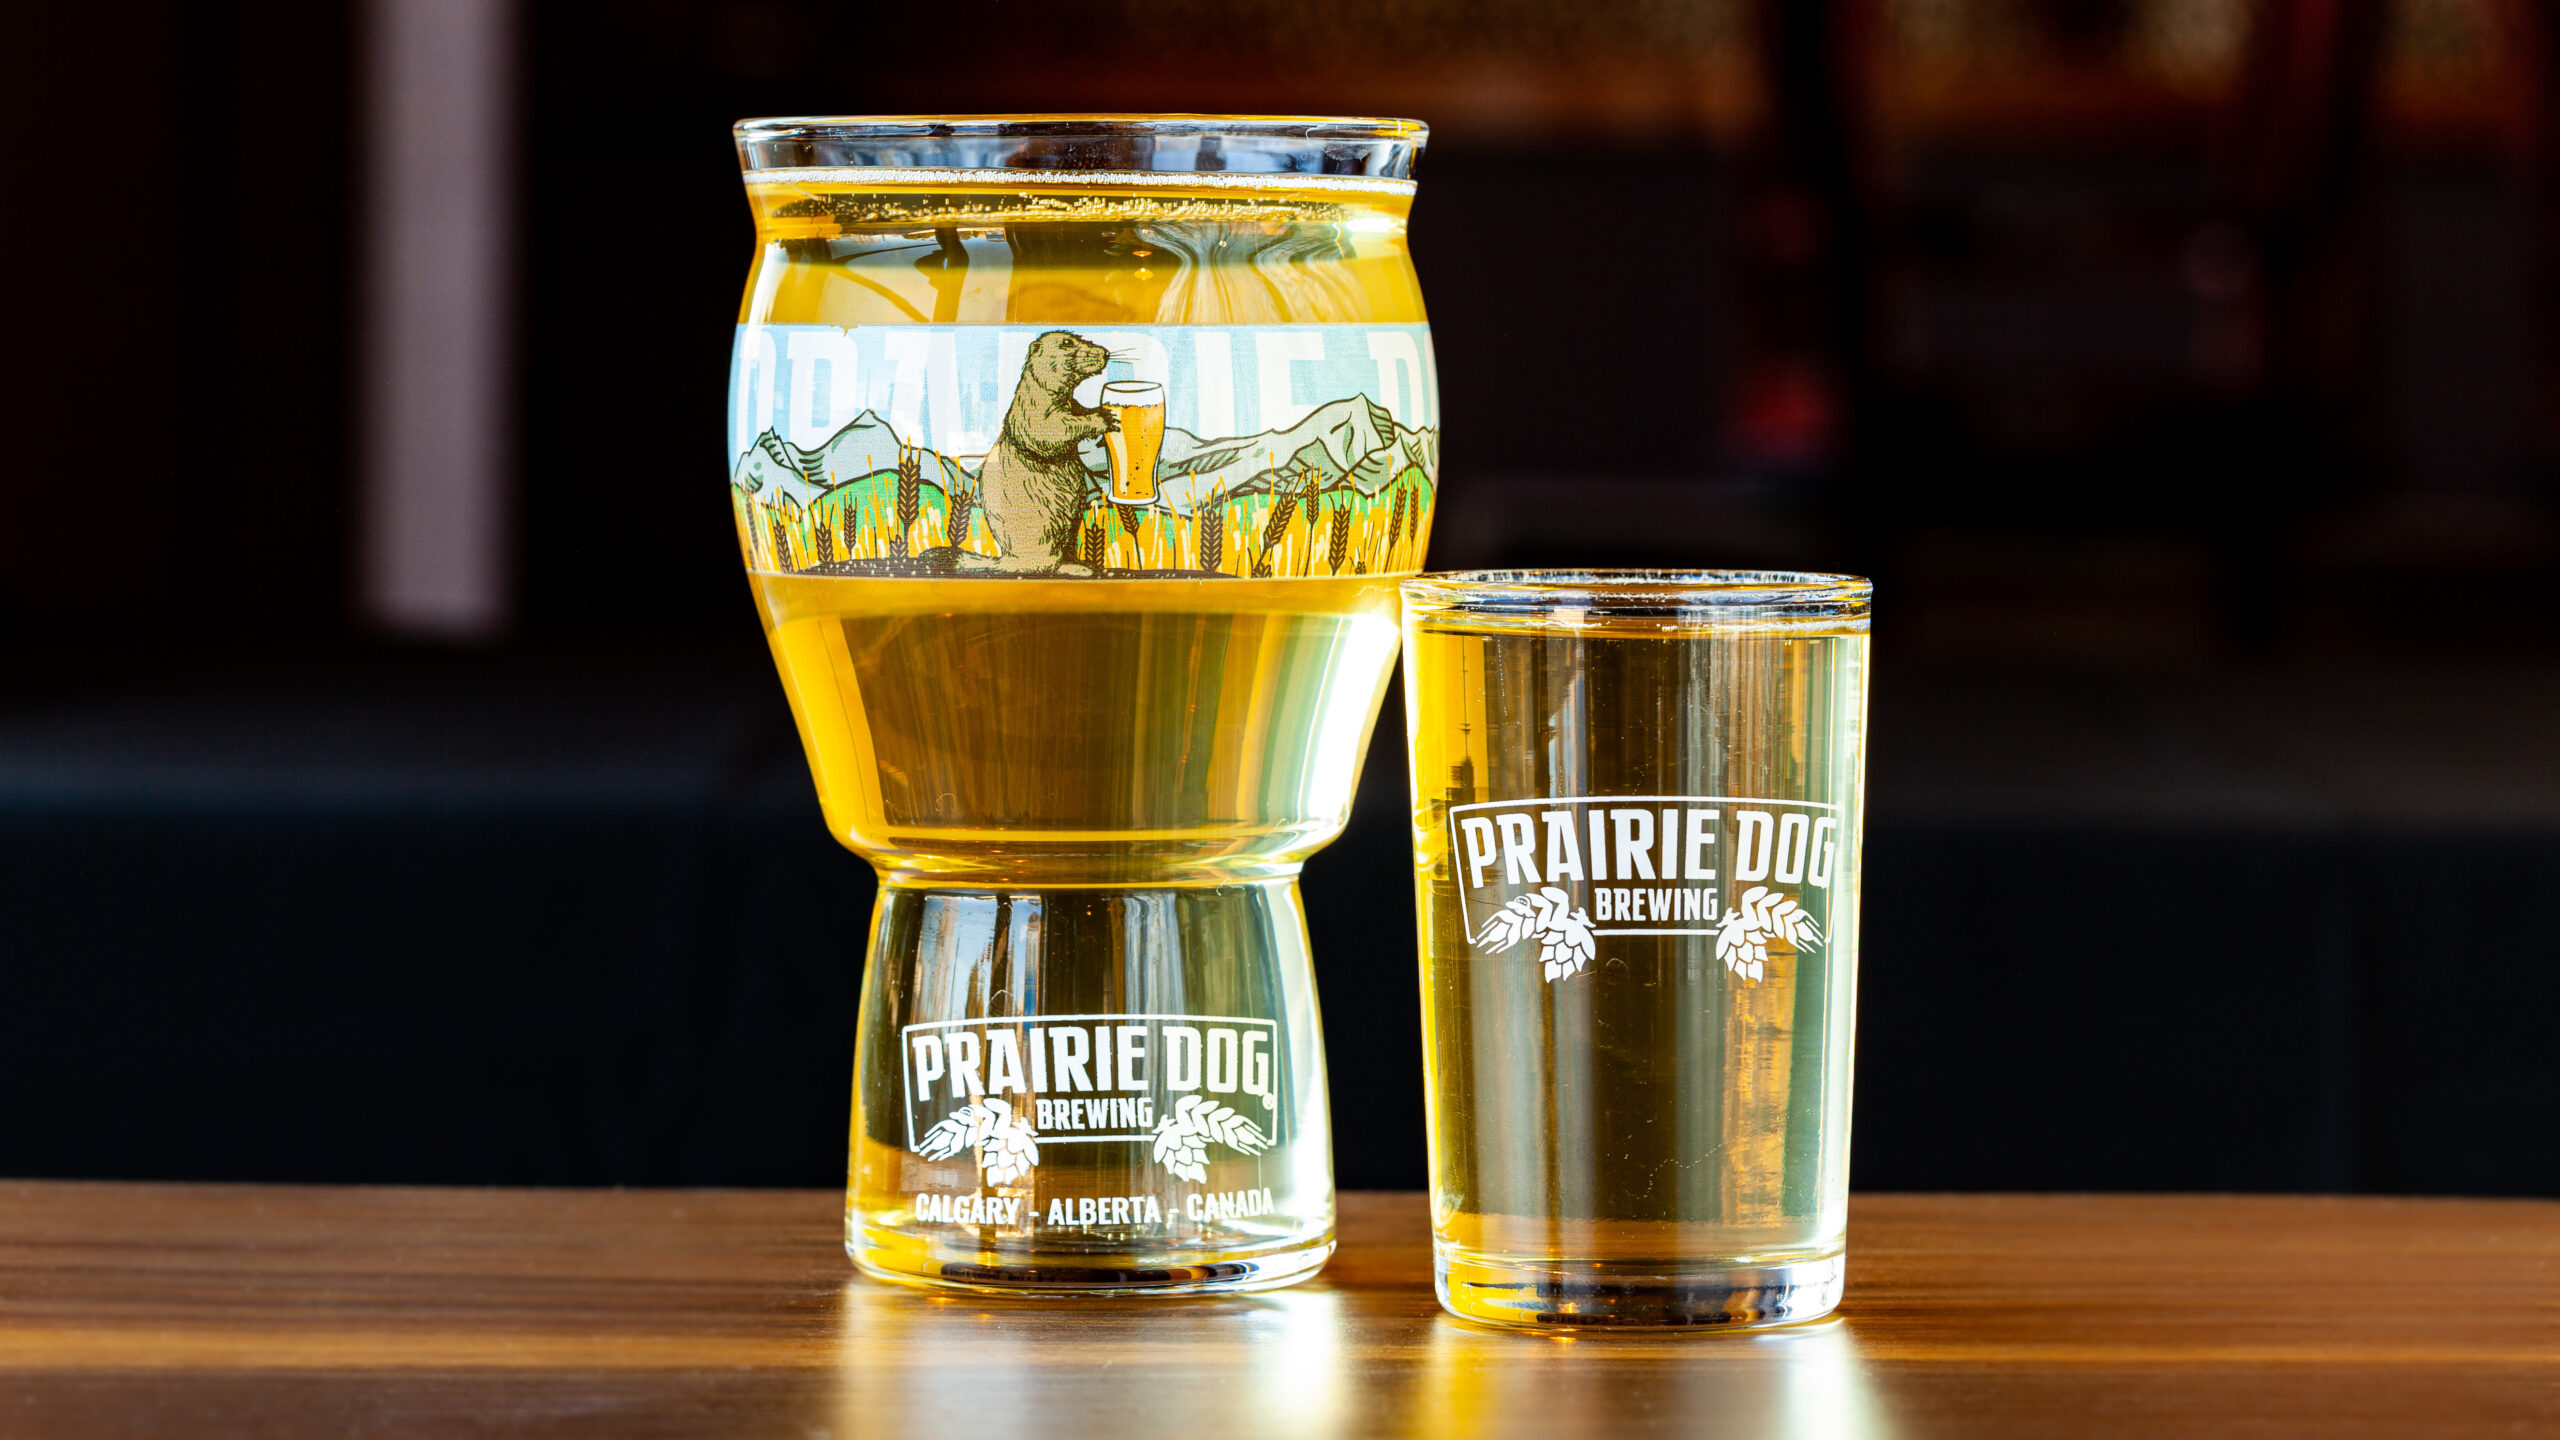 A 16-oz US pint and 5-oz taster pour of Uncommon Dry Apple Cider (Gluten Free) at Prairie Dog Brewing.